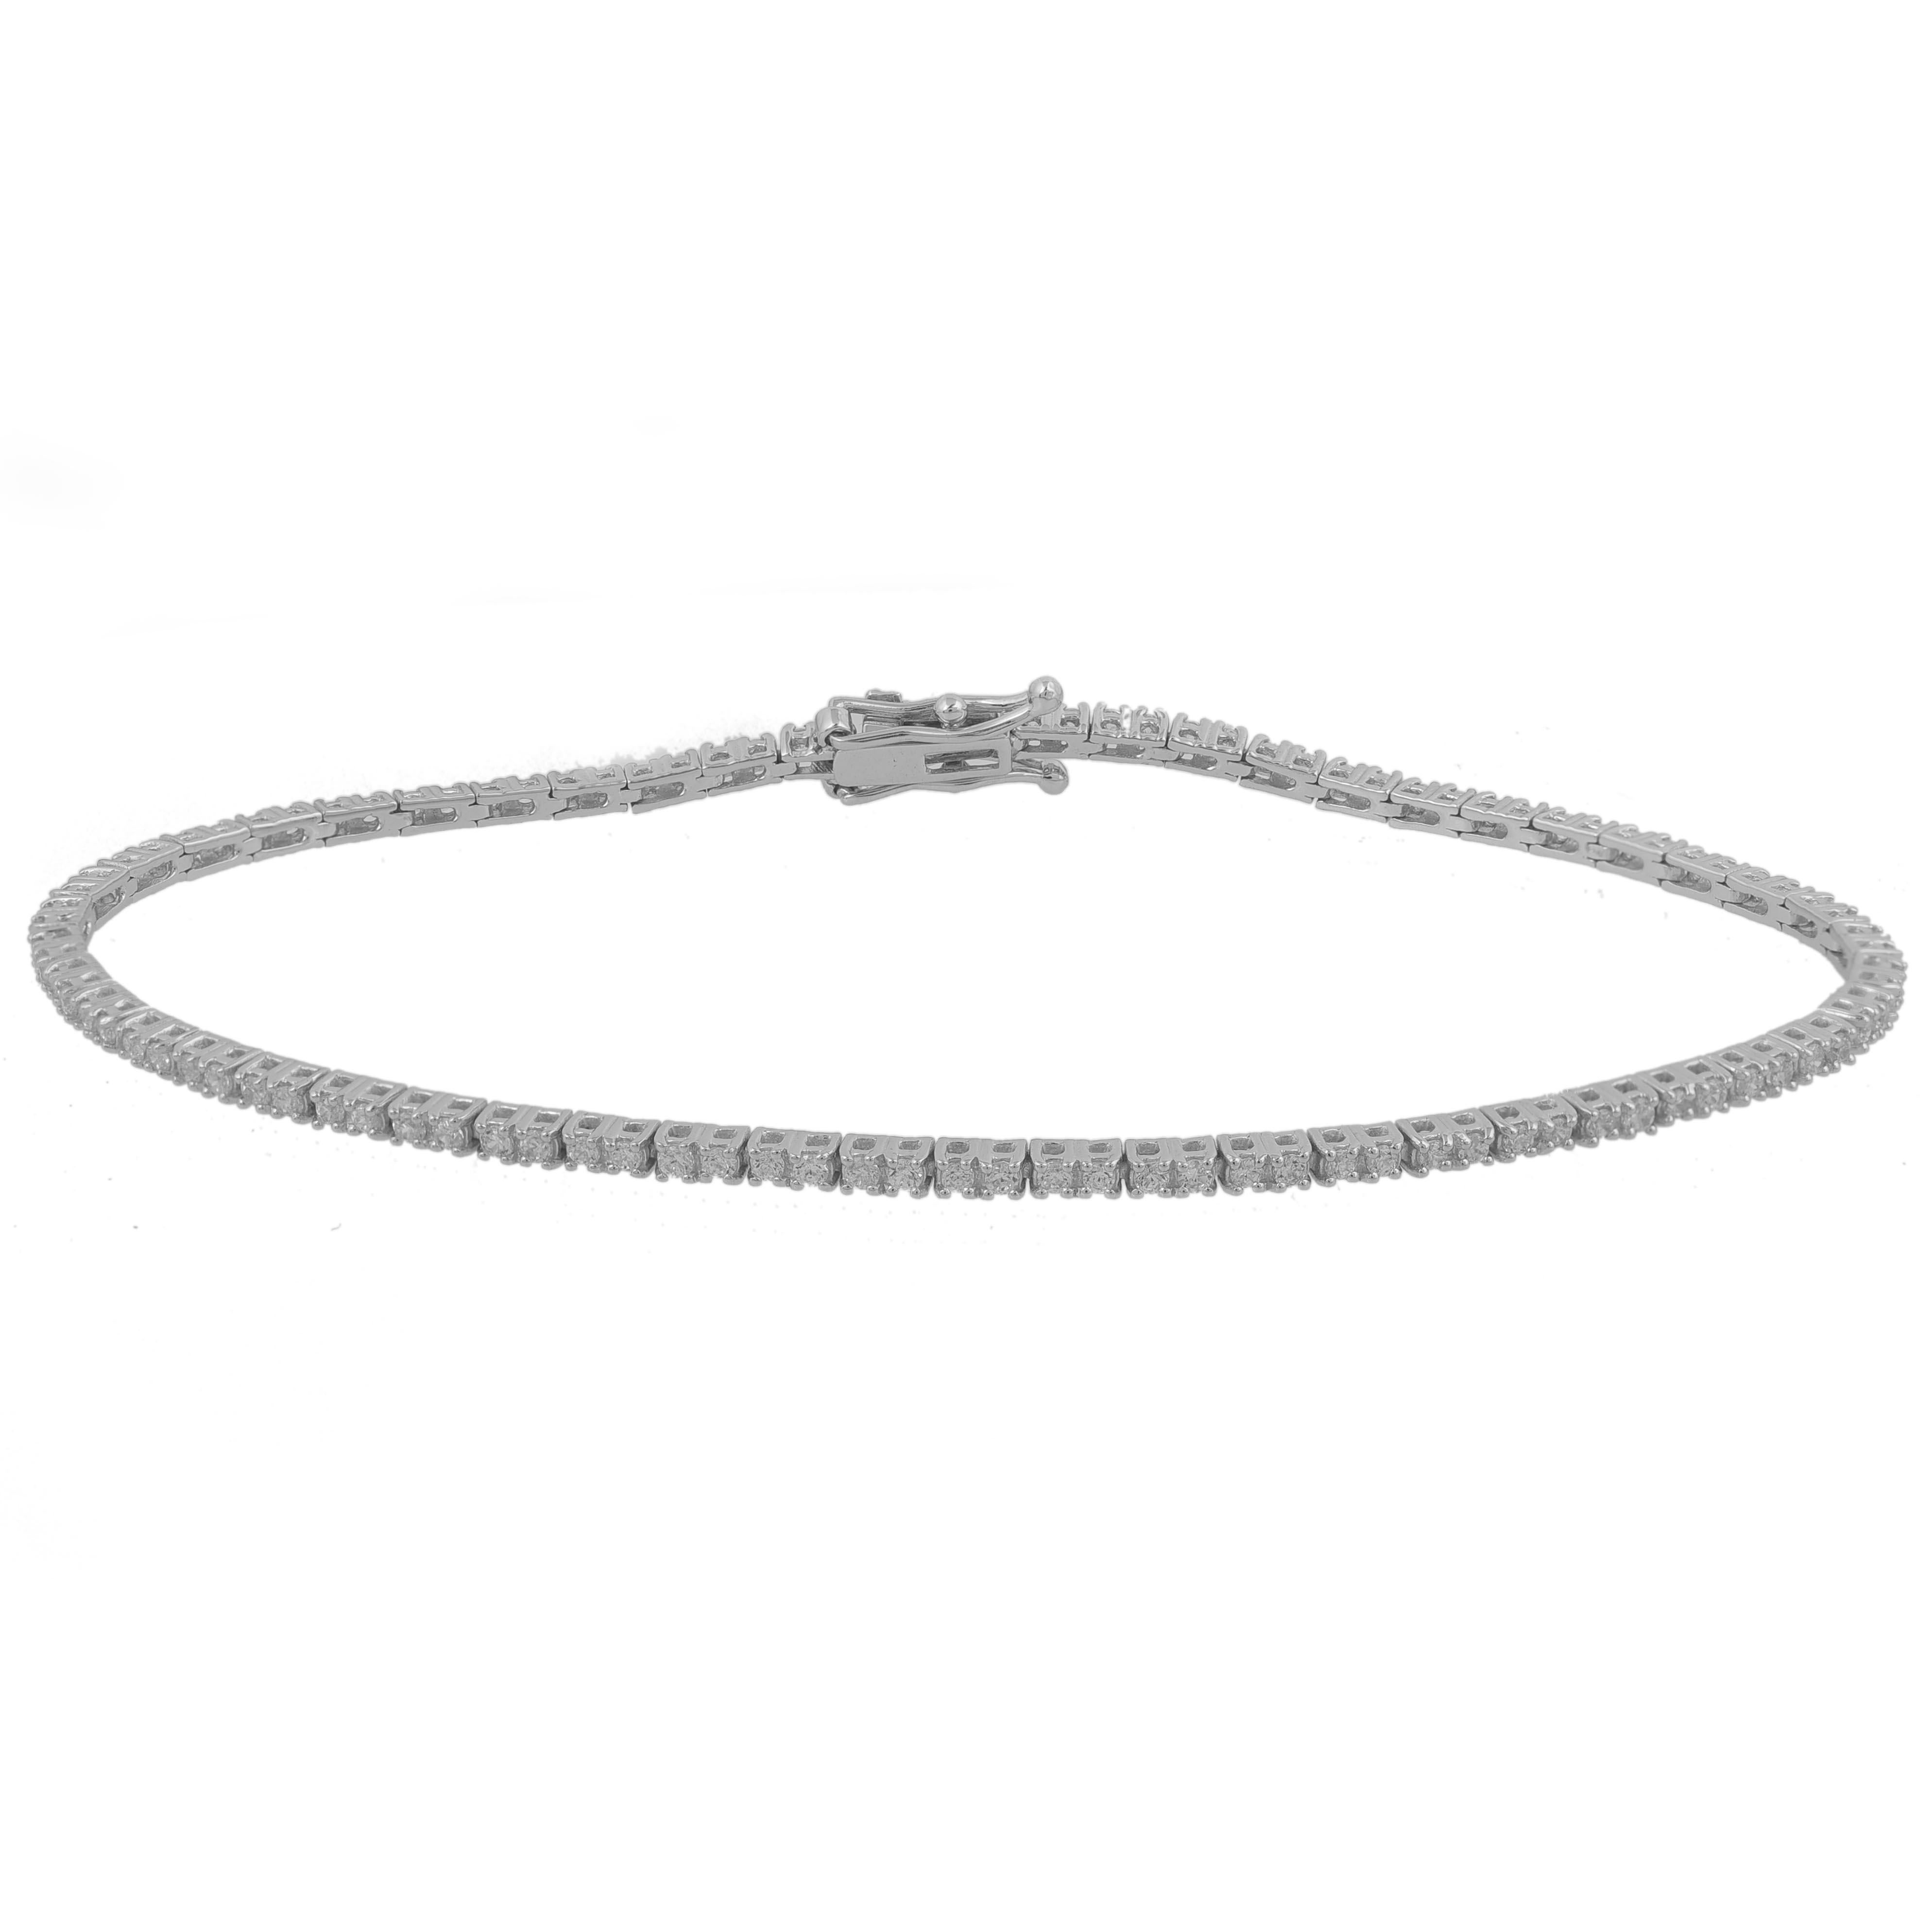 A graceful addition to her wardrobe, this diamond tennis bracelet brings the perfect touch of sparkle to her look. Beautifully hand-crafted by our inhouse experts in 14 karat white gold and embedded with 105 round brilliant diamond in prong setting.